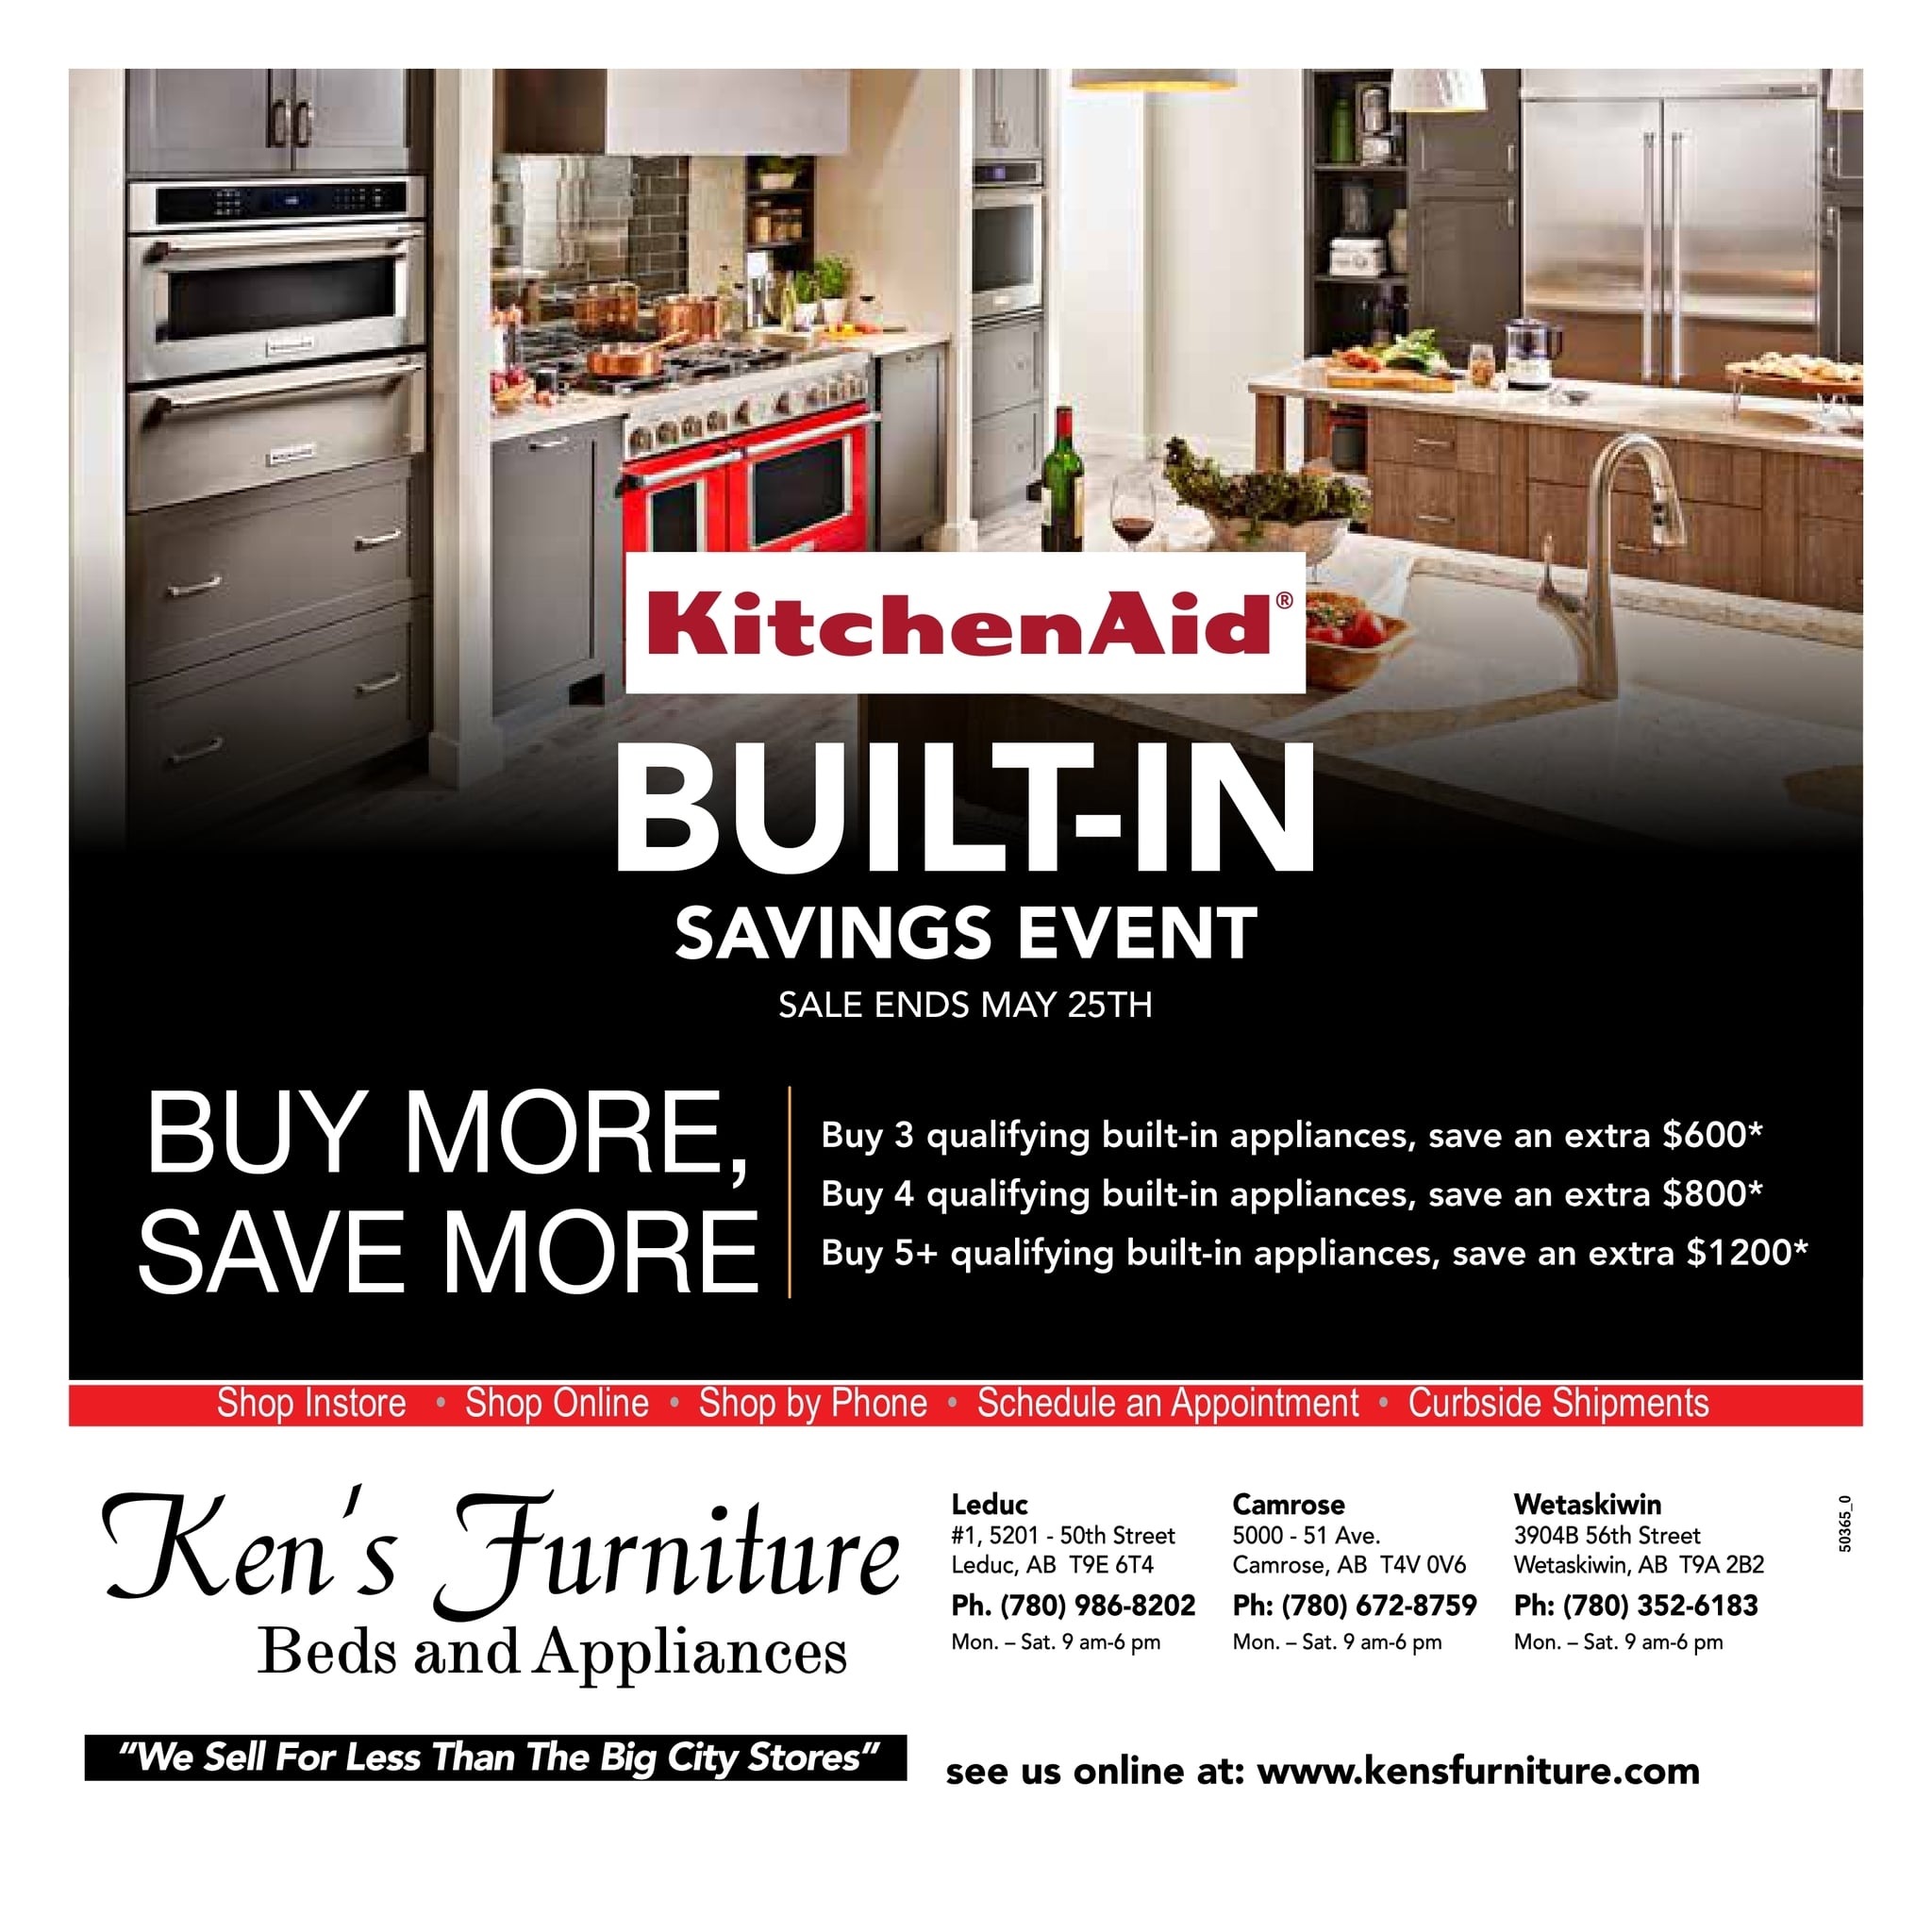 Ken’s Furniture - May is Maytag Month - Page 4